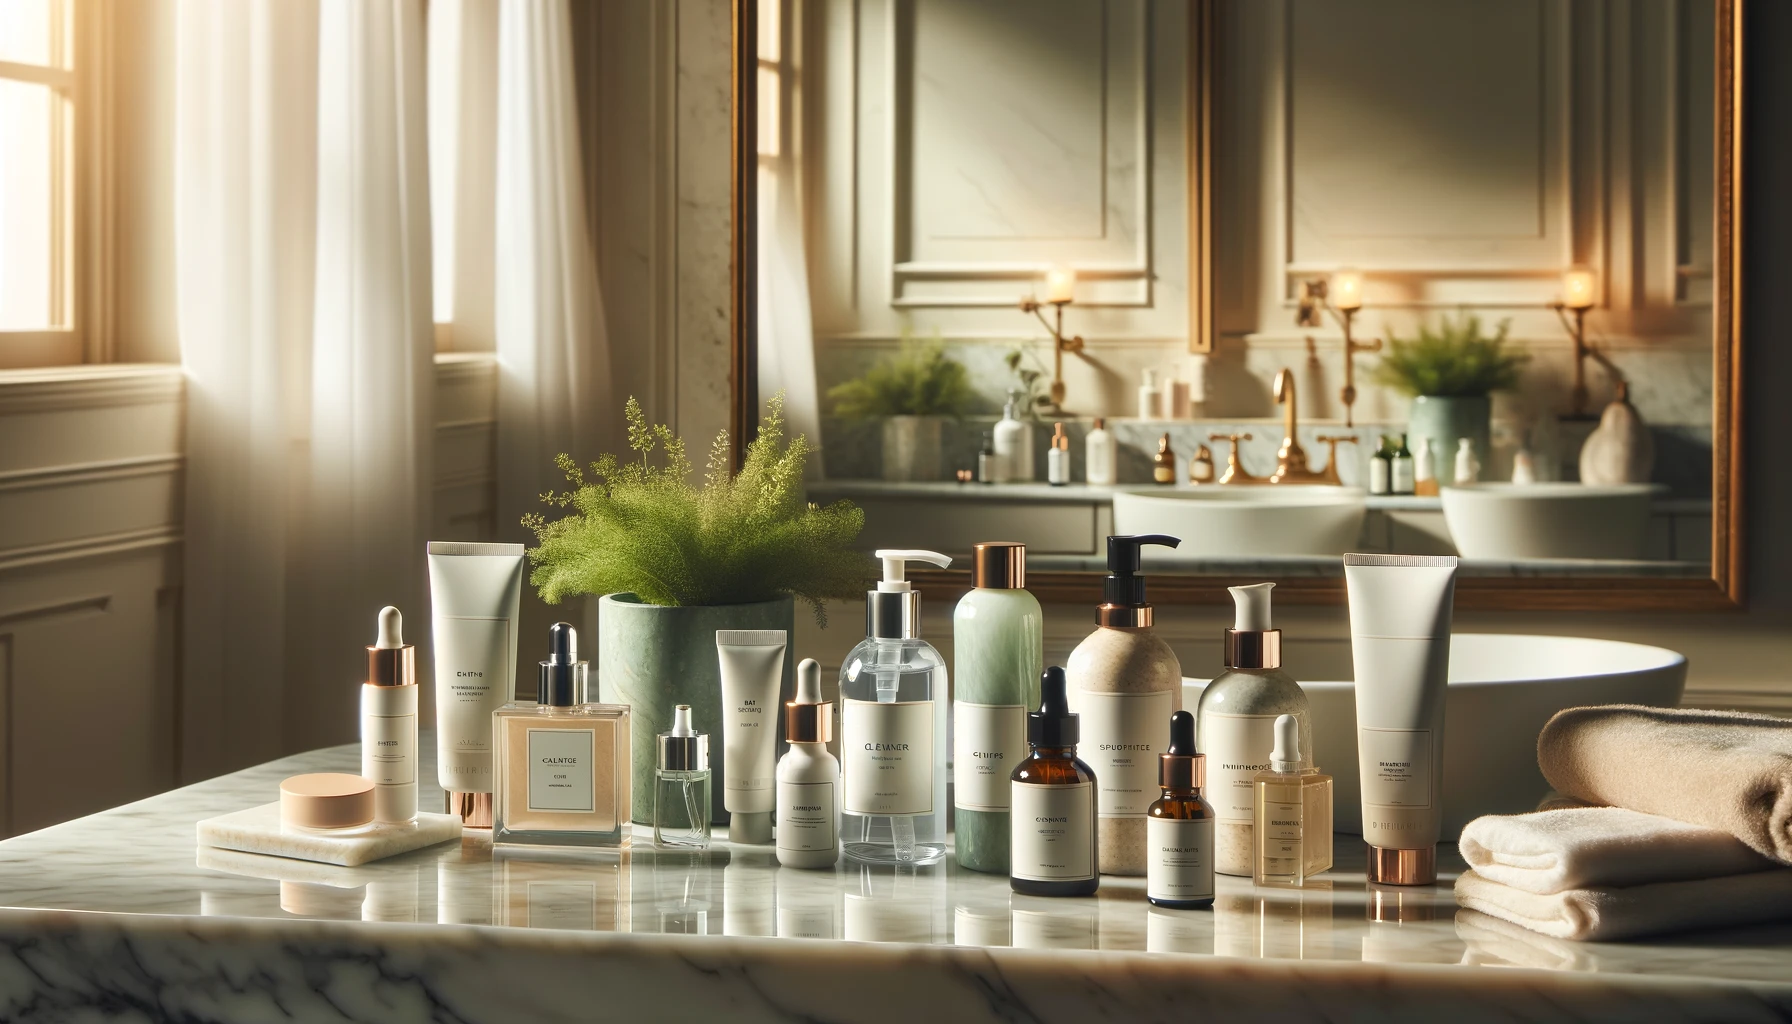 Luxurious multi-step skincare products arranged in a serene bathroom setting, featured by Healthy Life - New Start.